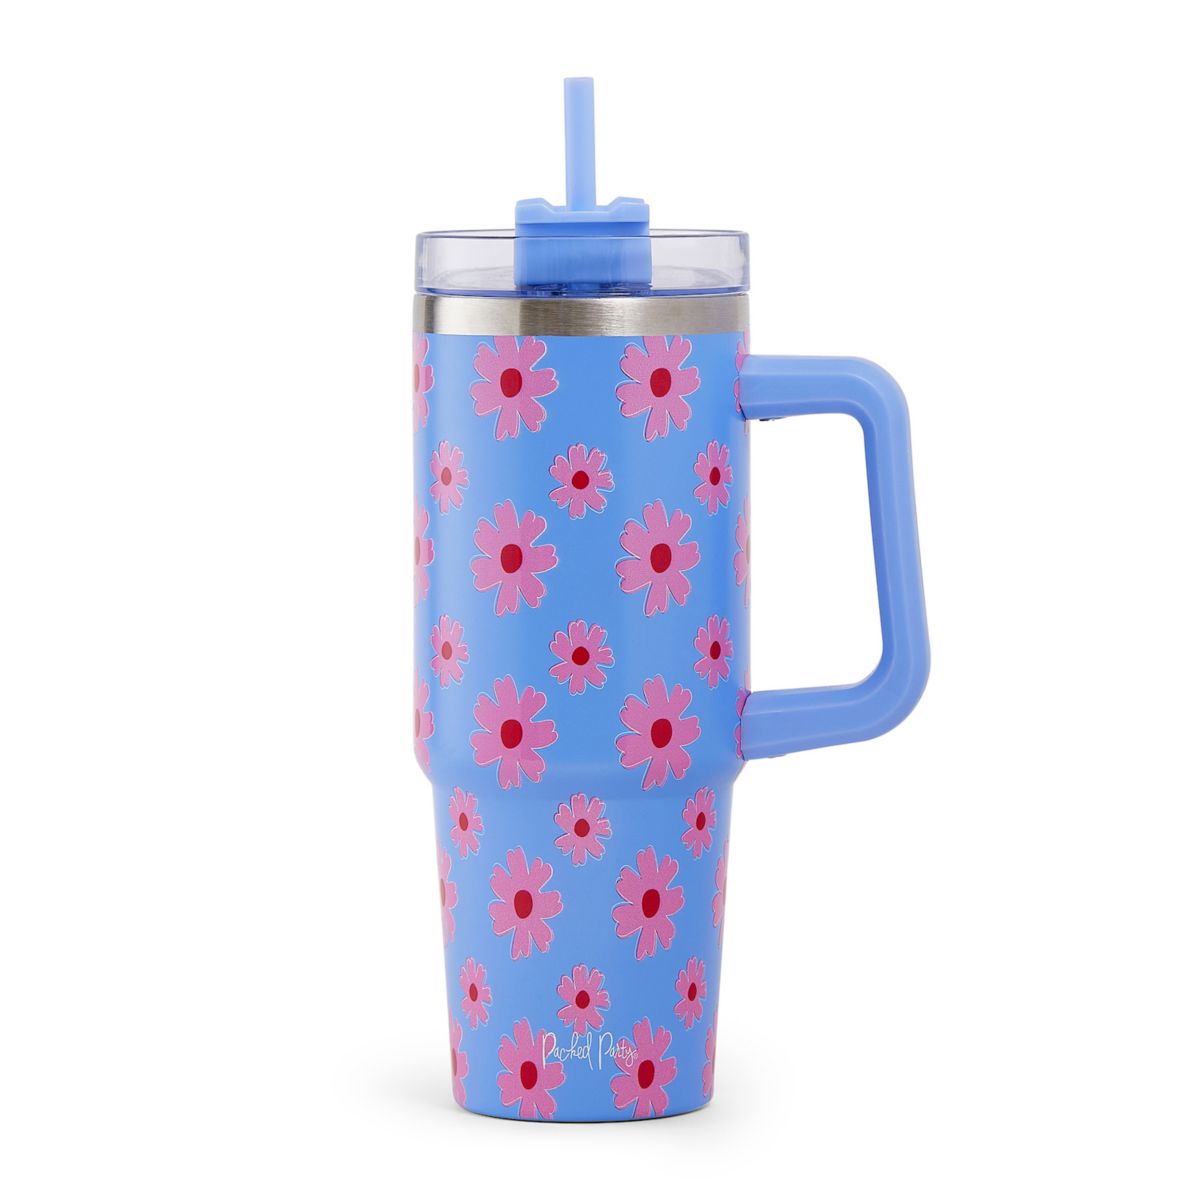 Packed Party Checkered Print 30-oz. Stainless Steel Tumbler Packed Party